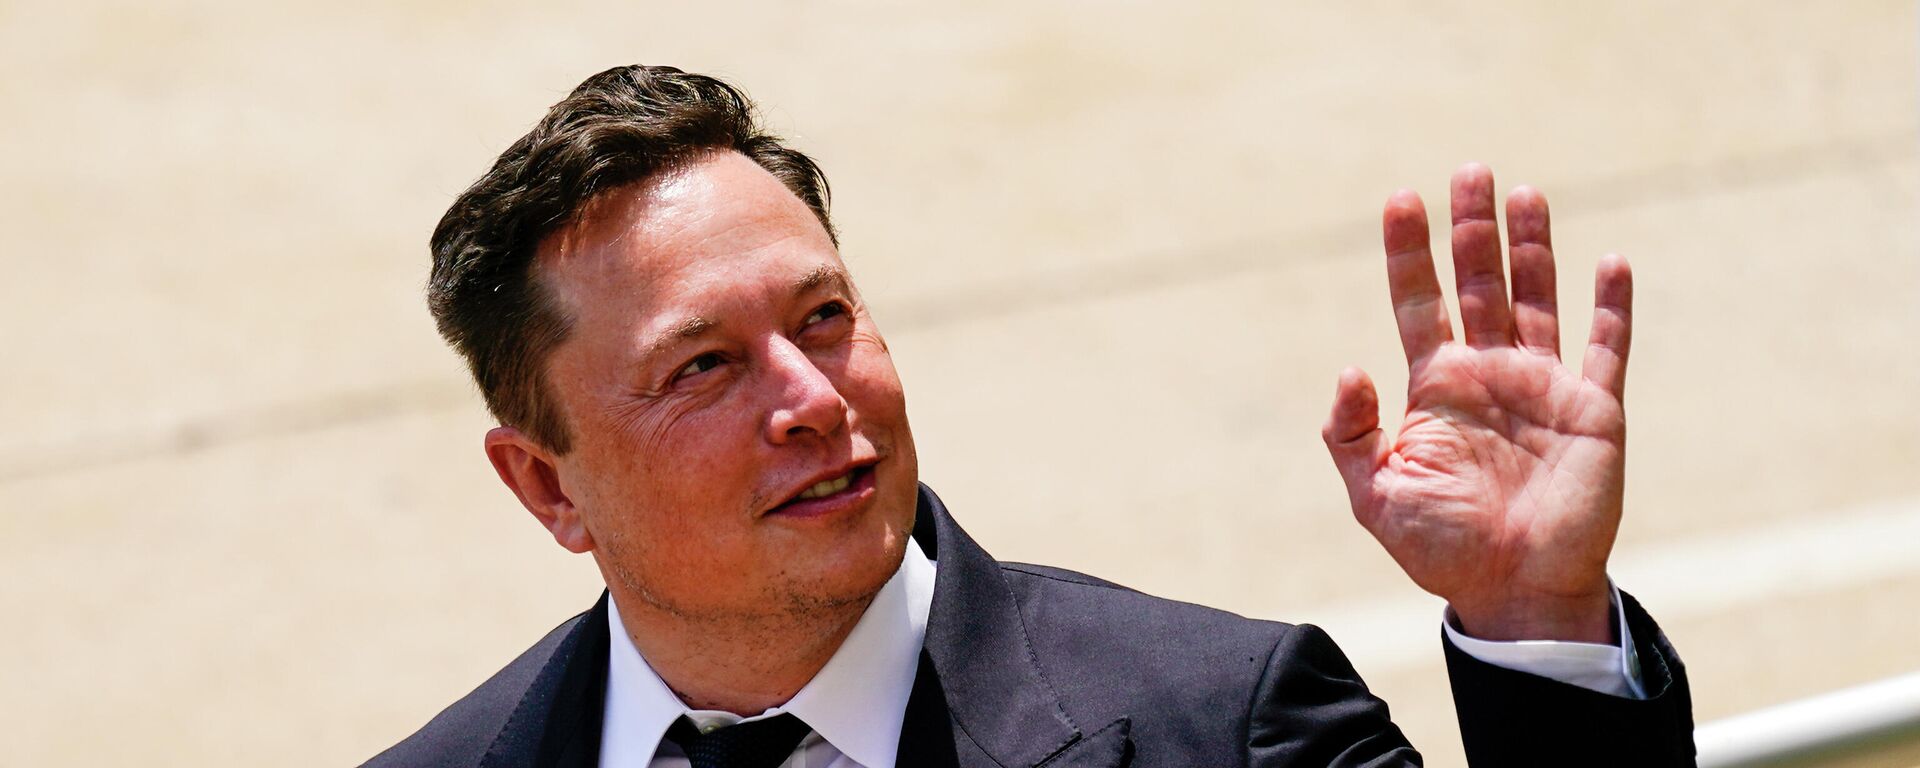 CEO Elon Musk departs from the justice center in Wilmington, Del., Tuesday, July 13, 2021. - Sputnik International, 1920, 27.03.2022